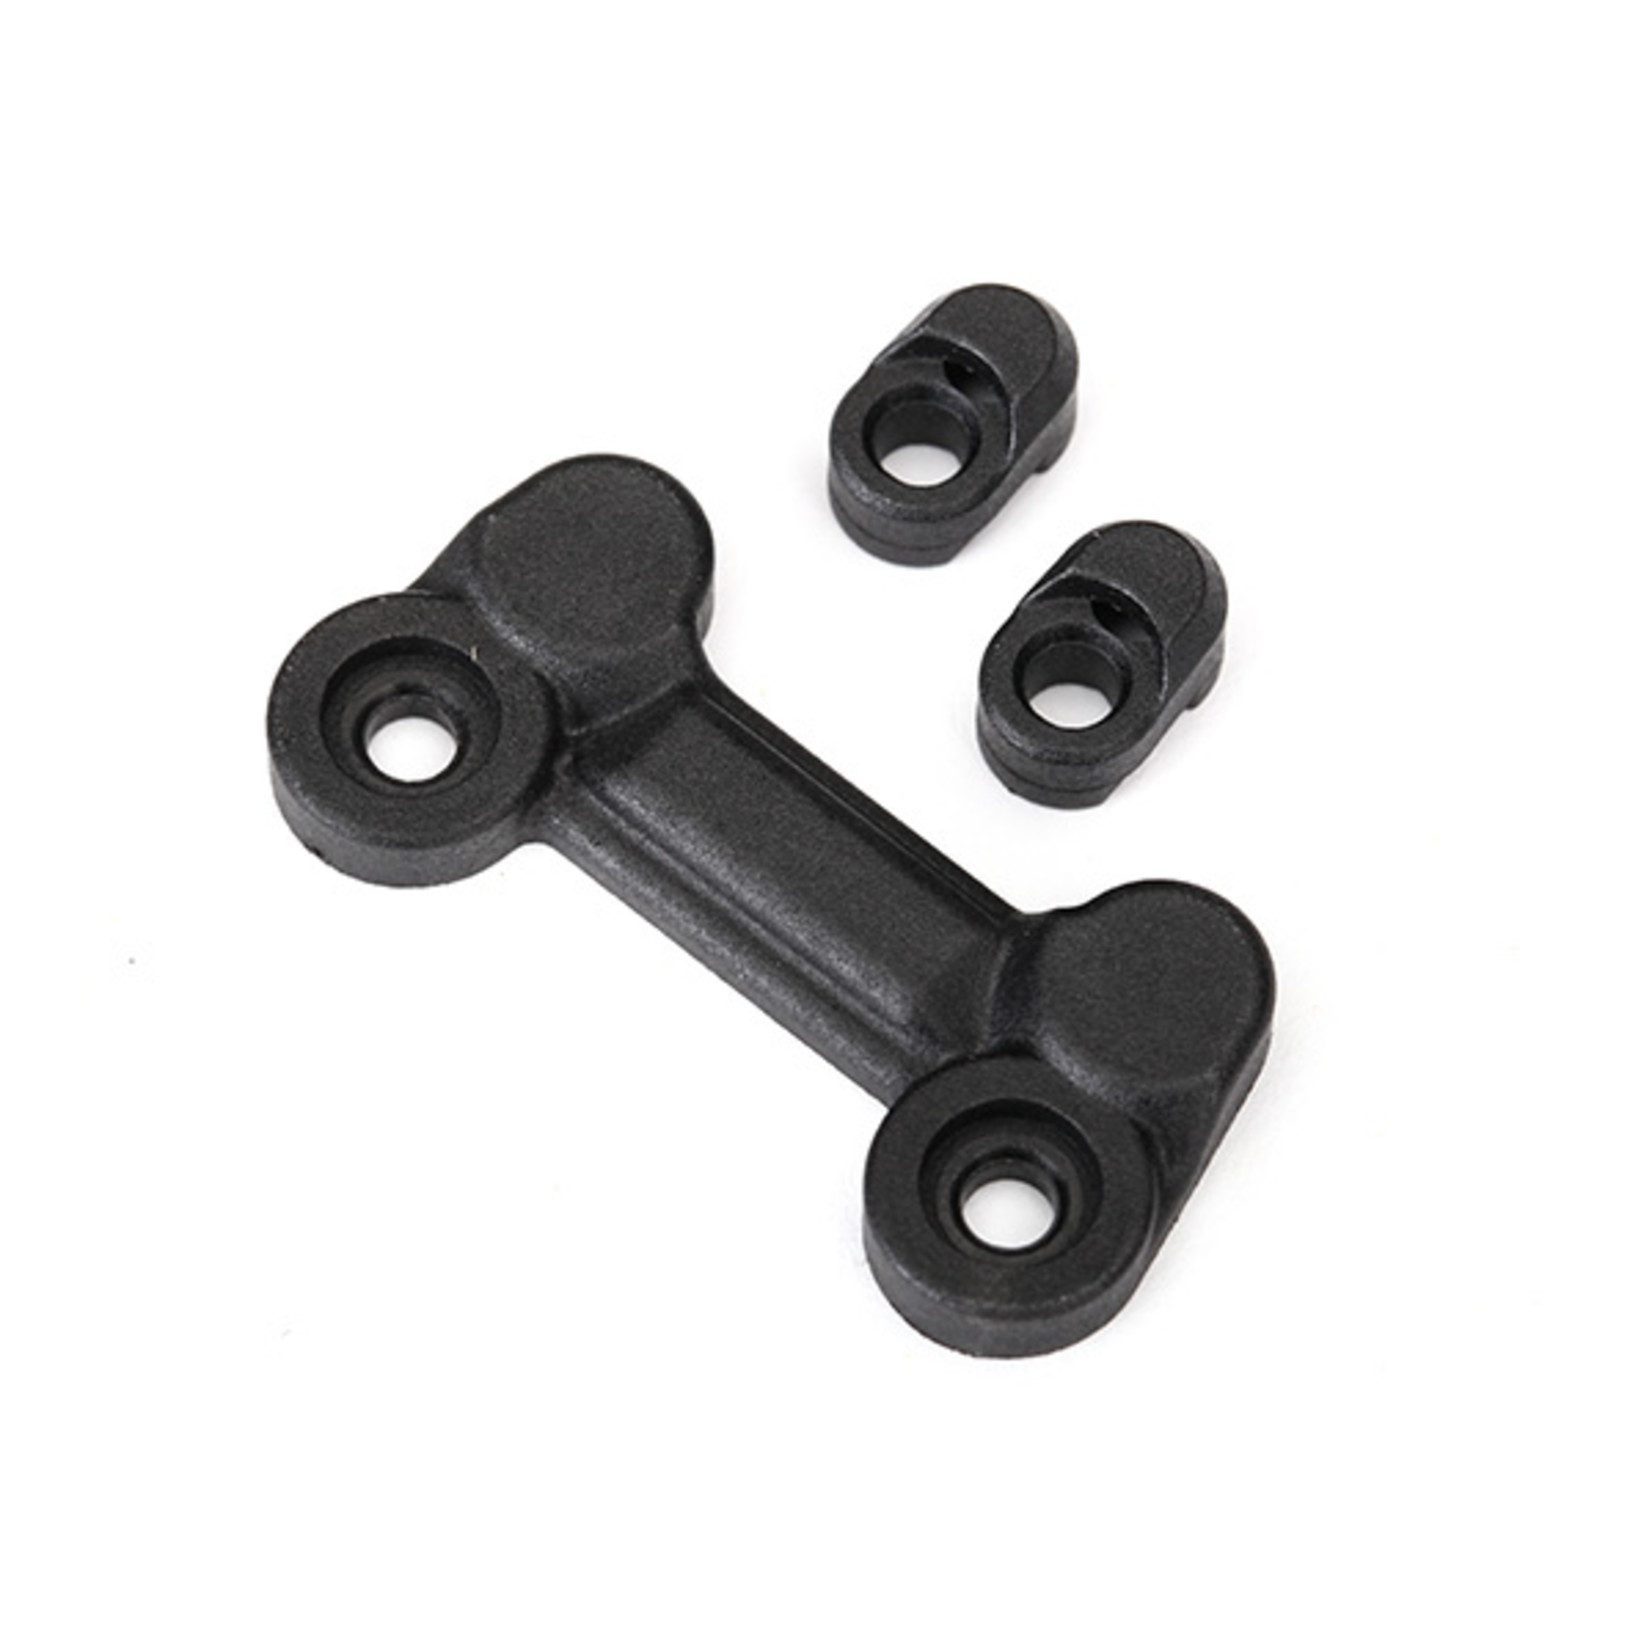 Traxxas 8546 - Suspension pin retainers (upper (2), lower